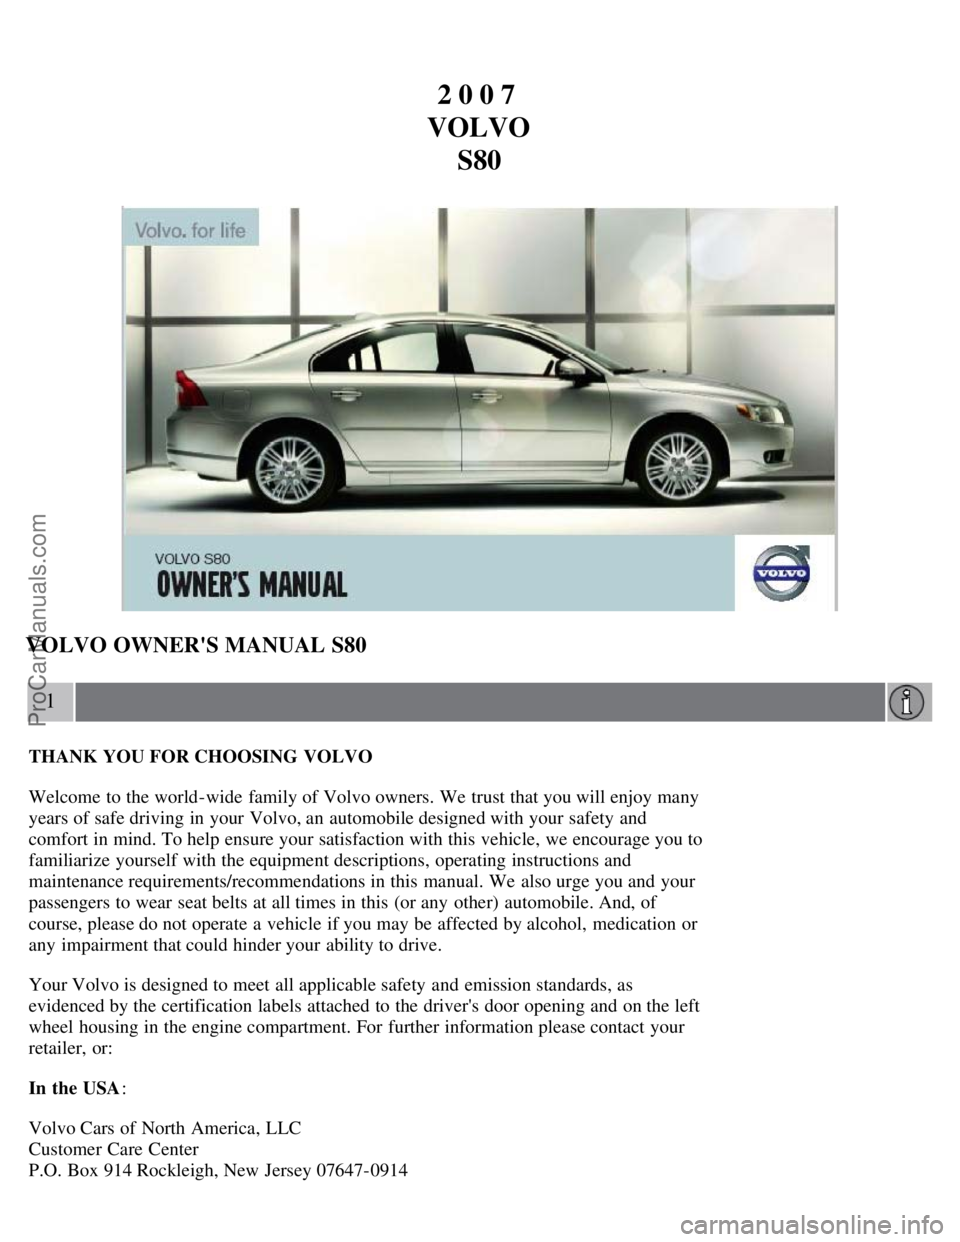 VOLVO S80 2007  Owners Manual 2 0 0 7 
VOLVO S80
VOLVO OWNERS MANUAL S80
1
THANK YOU FOR CHOOSING  VOLVO
Welcome to the world-wide  family of Volvo owners. We trust that you will enjoy many
years of safe driving in your Volvo, an